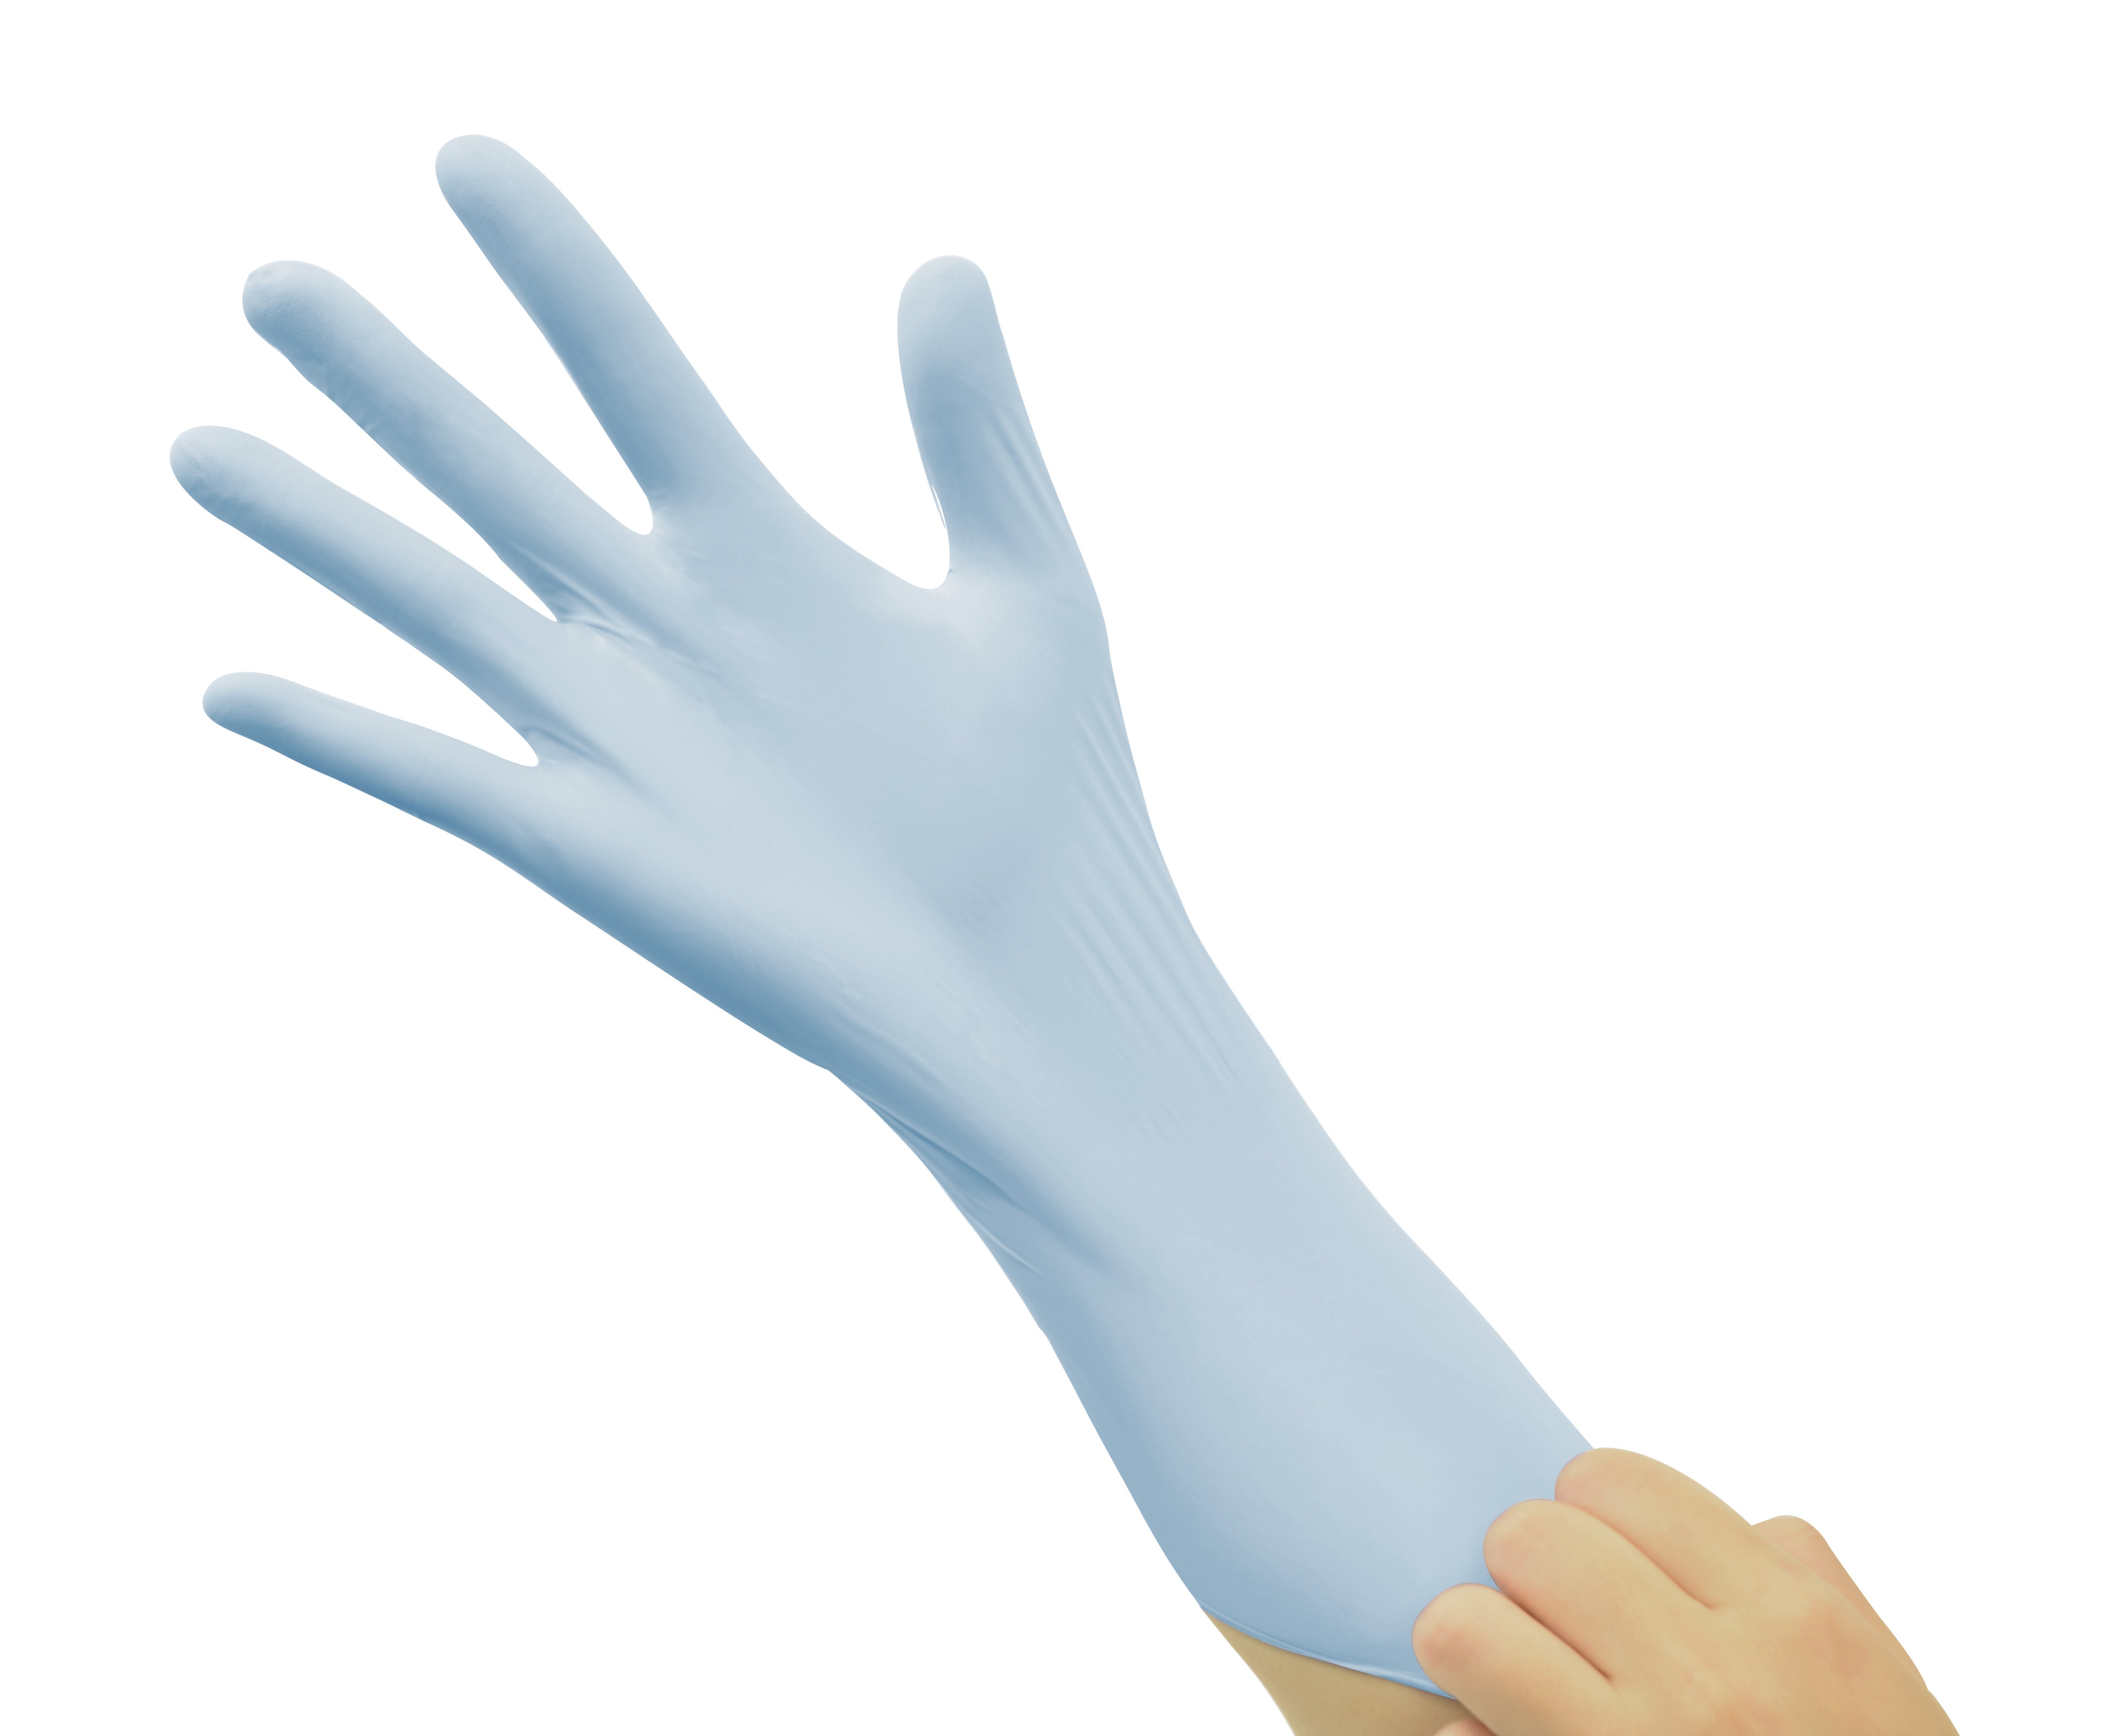 Allcare Allcare Glove Nitrile Long Cuff Blue - BX/100 Disposable Gloves Small Box of 100